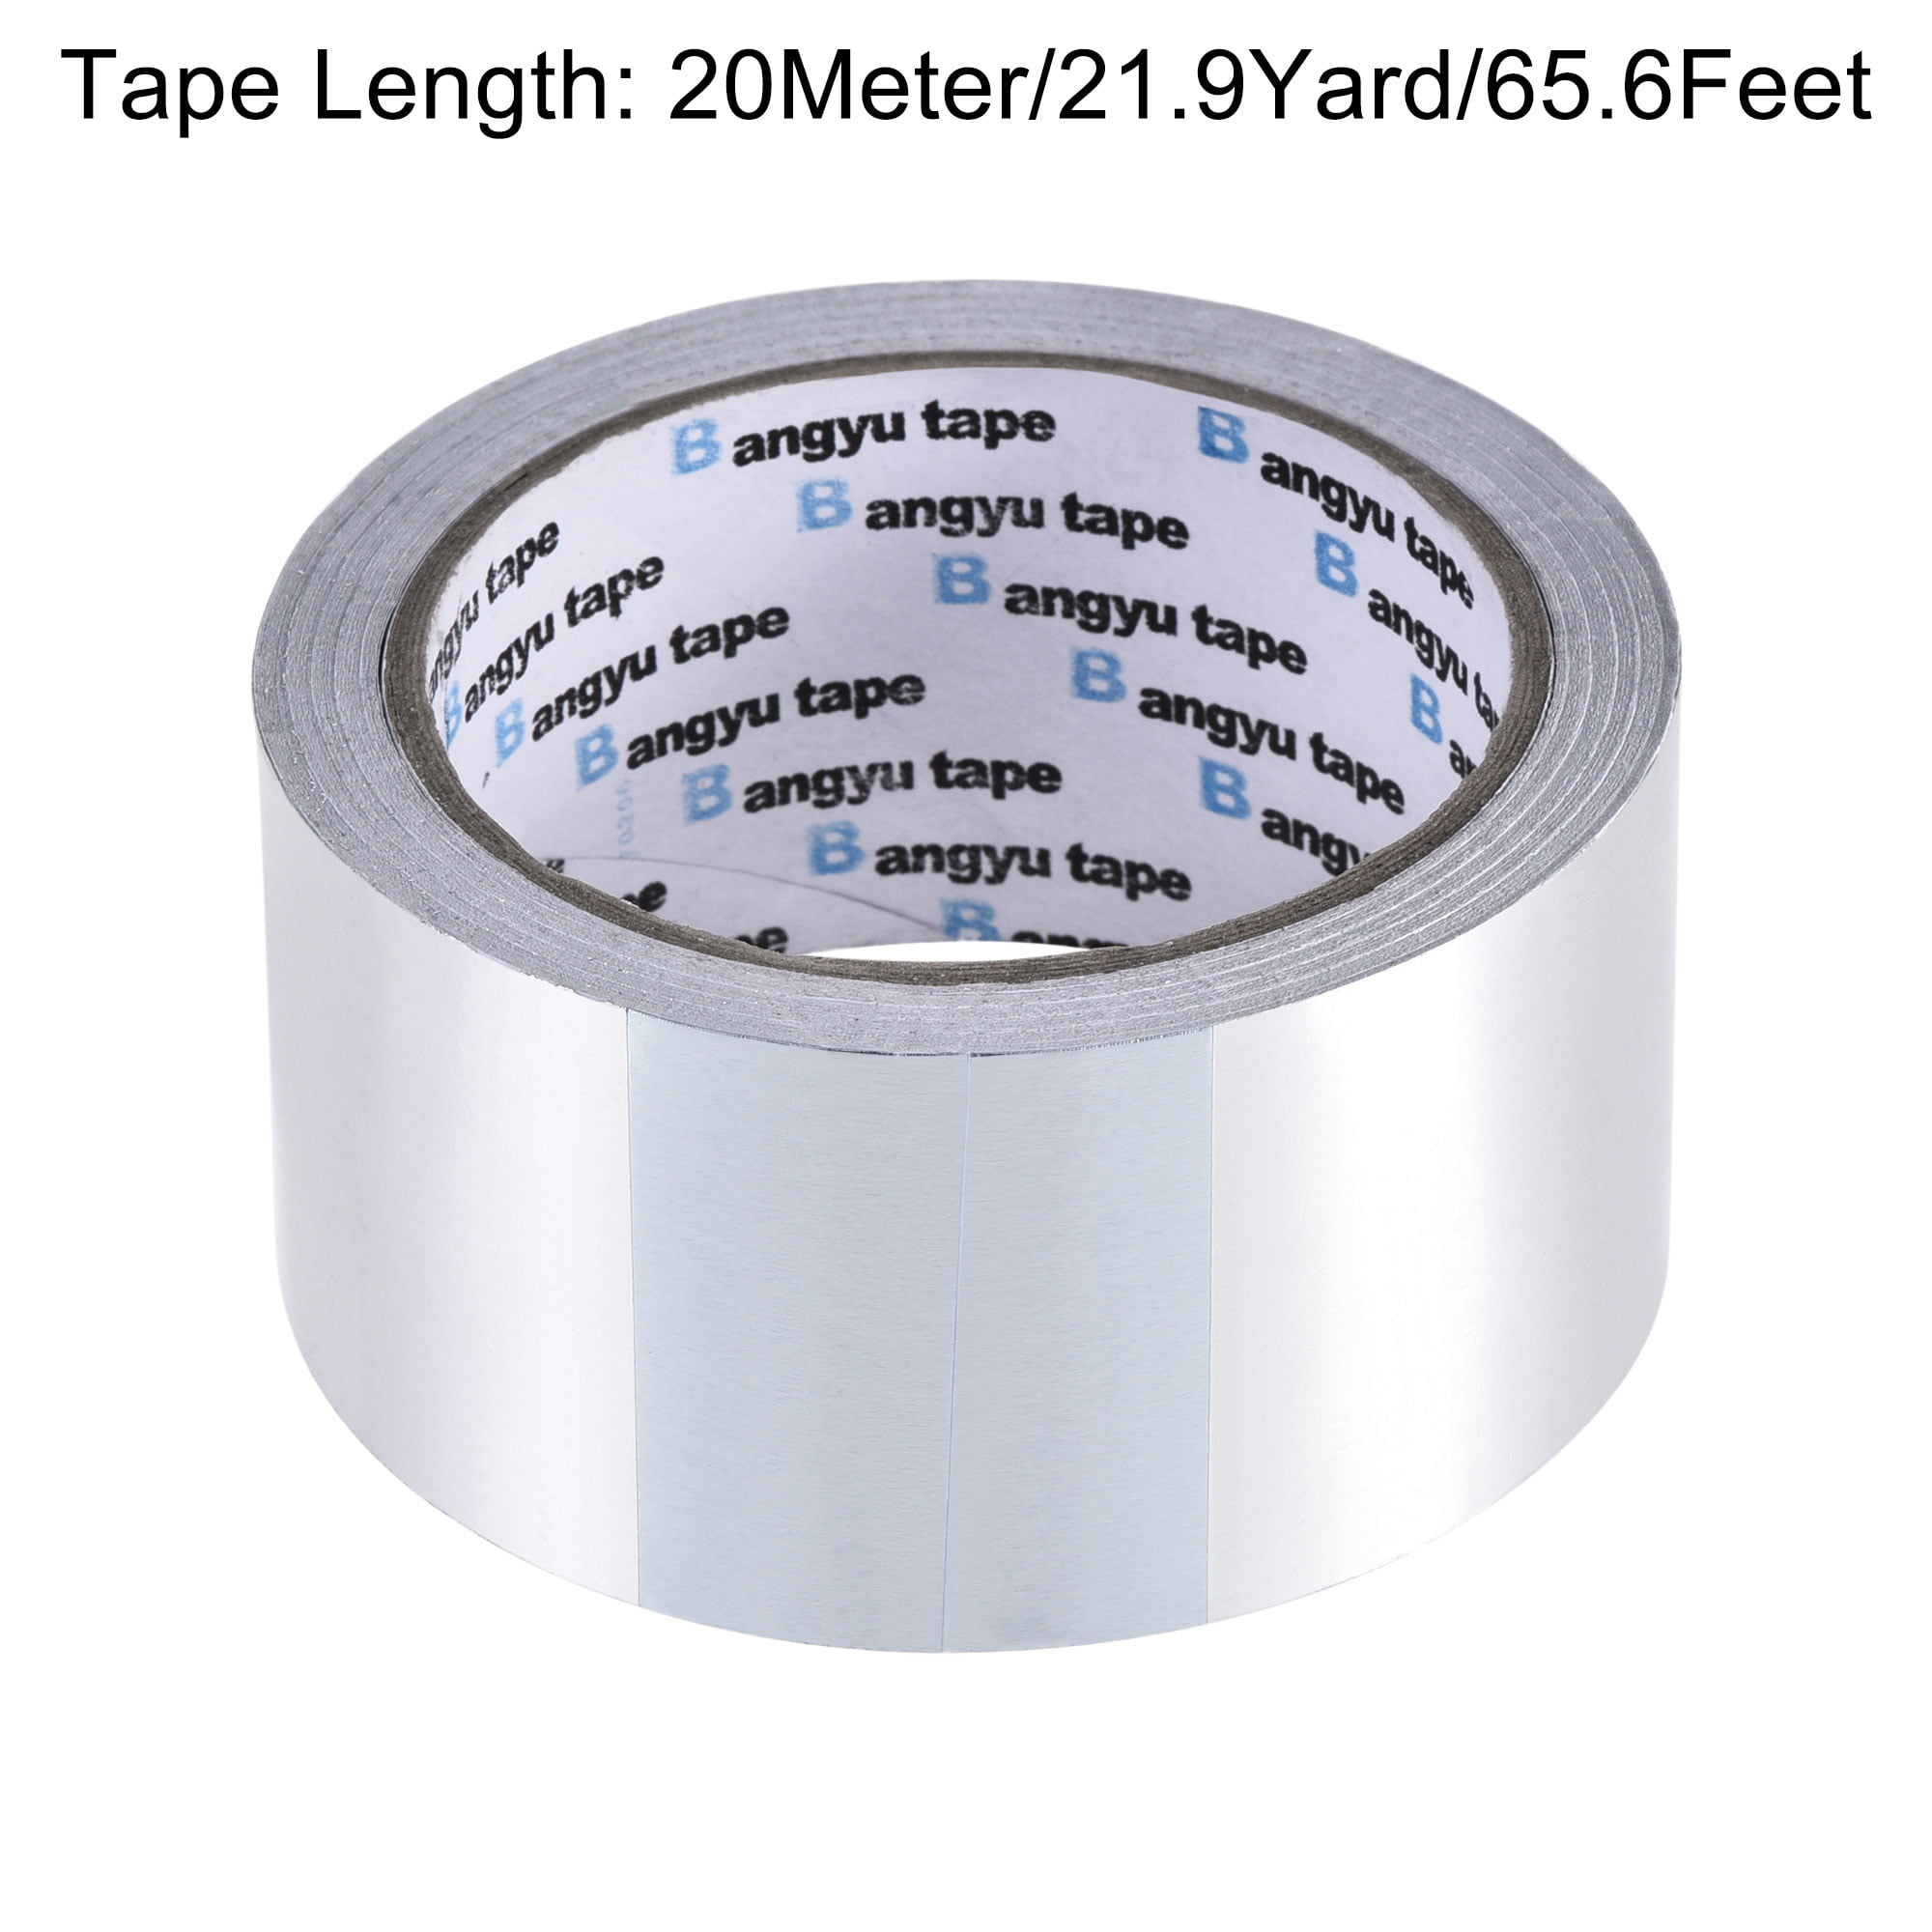 uxcell Heat Resistant Tape - High Temperature Heat Transfer Tape Aluminum  Foil Adhesive Tape 50mm x 20m(66ft)